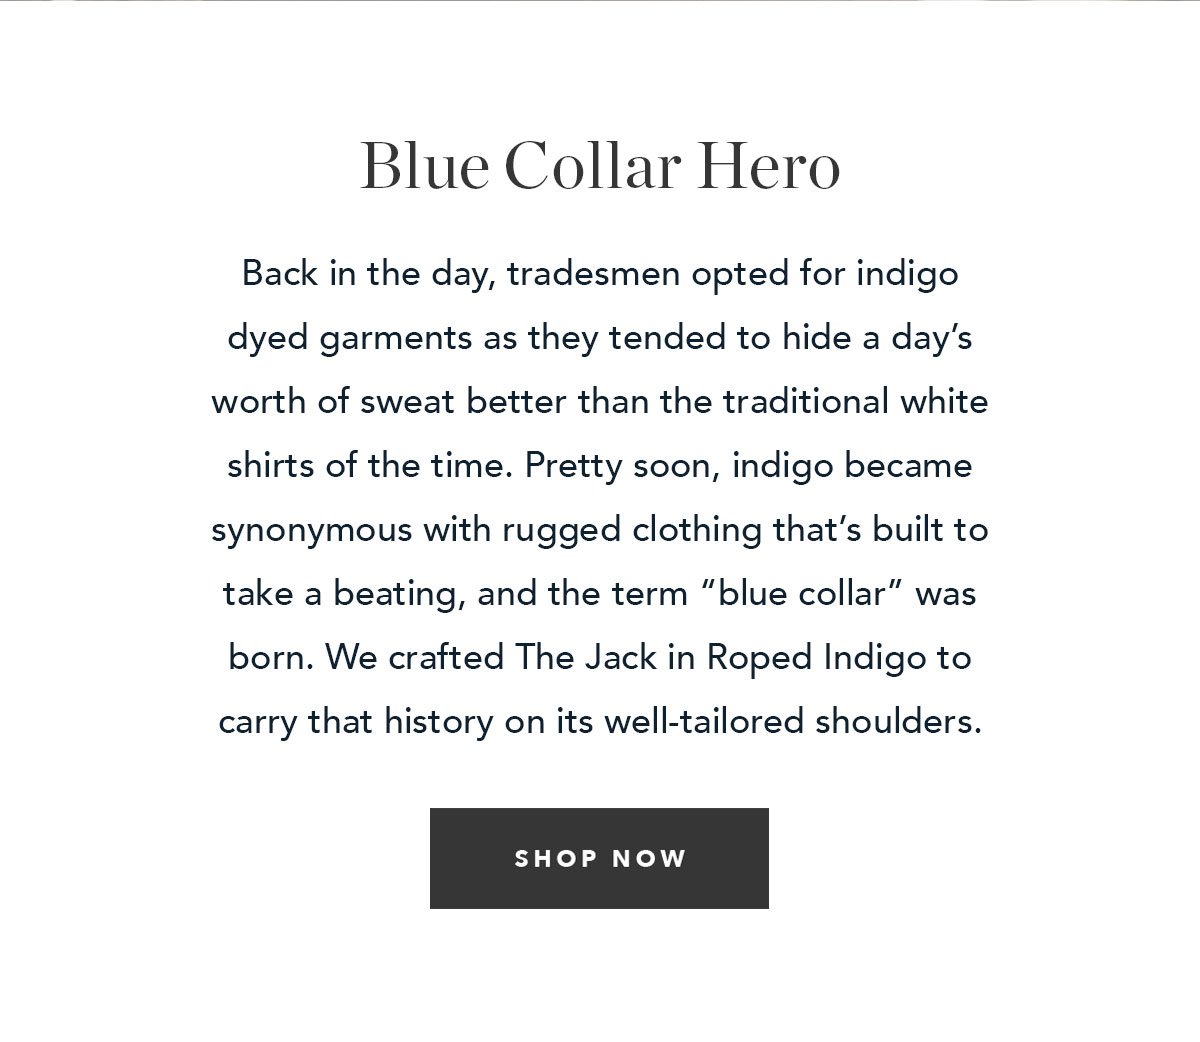 Blue Collar Hero: Back in the day, tradesmen opted for indigo dyed garments as they tended to hide a day’s worth of sweat better than the traditional white shirts of the time. Pretty soon, indigo became synonymous with rugged clothing that’s built to take a beating, and the term “blue collar” was born.